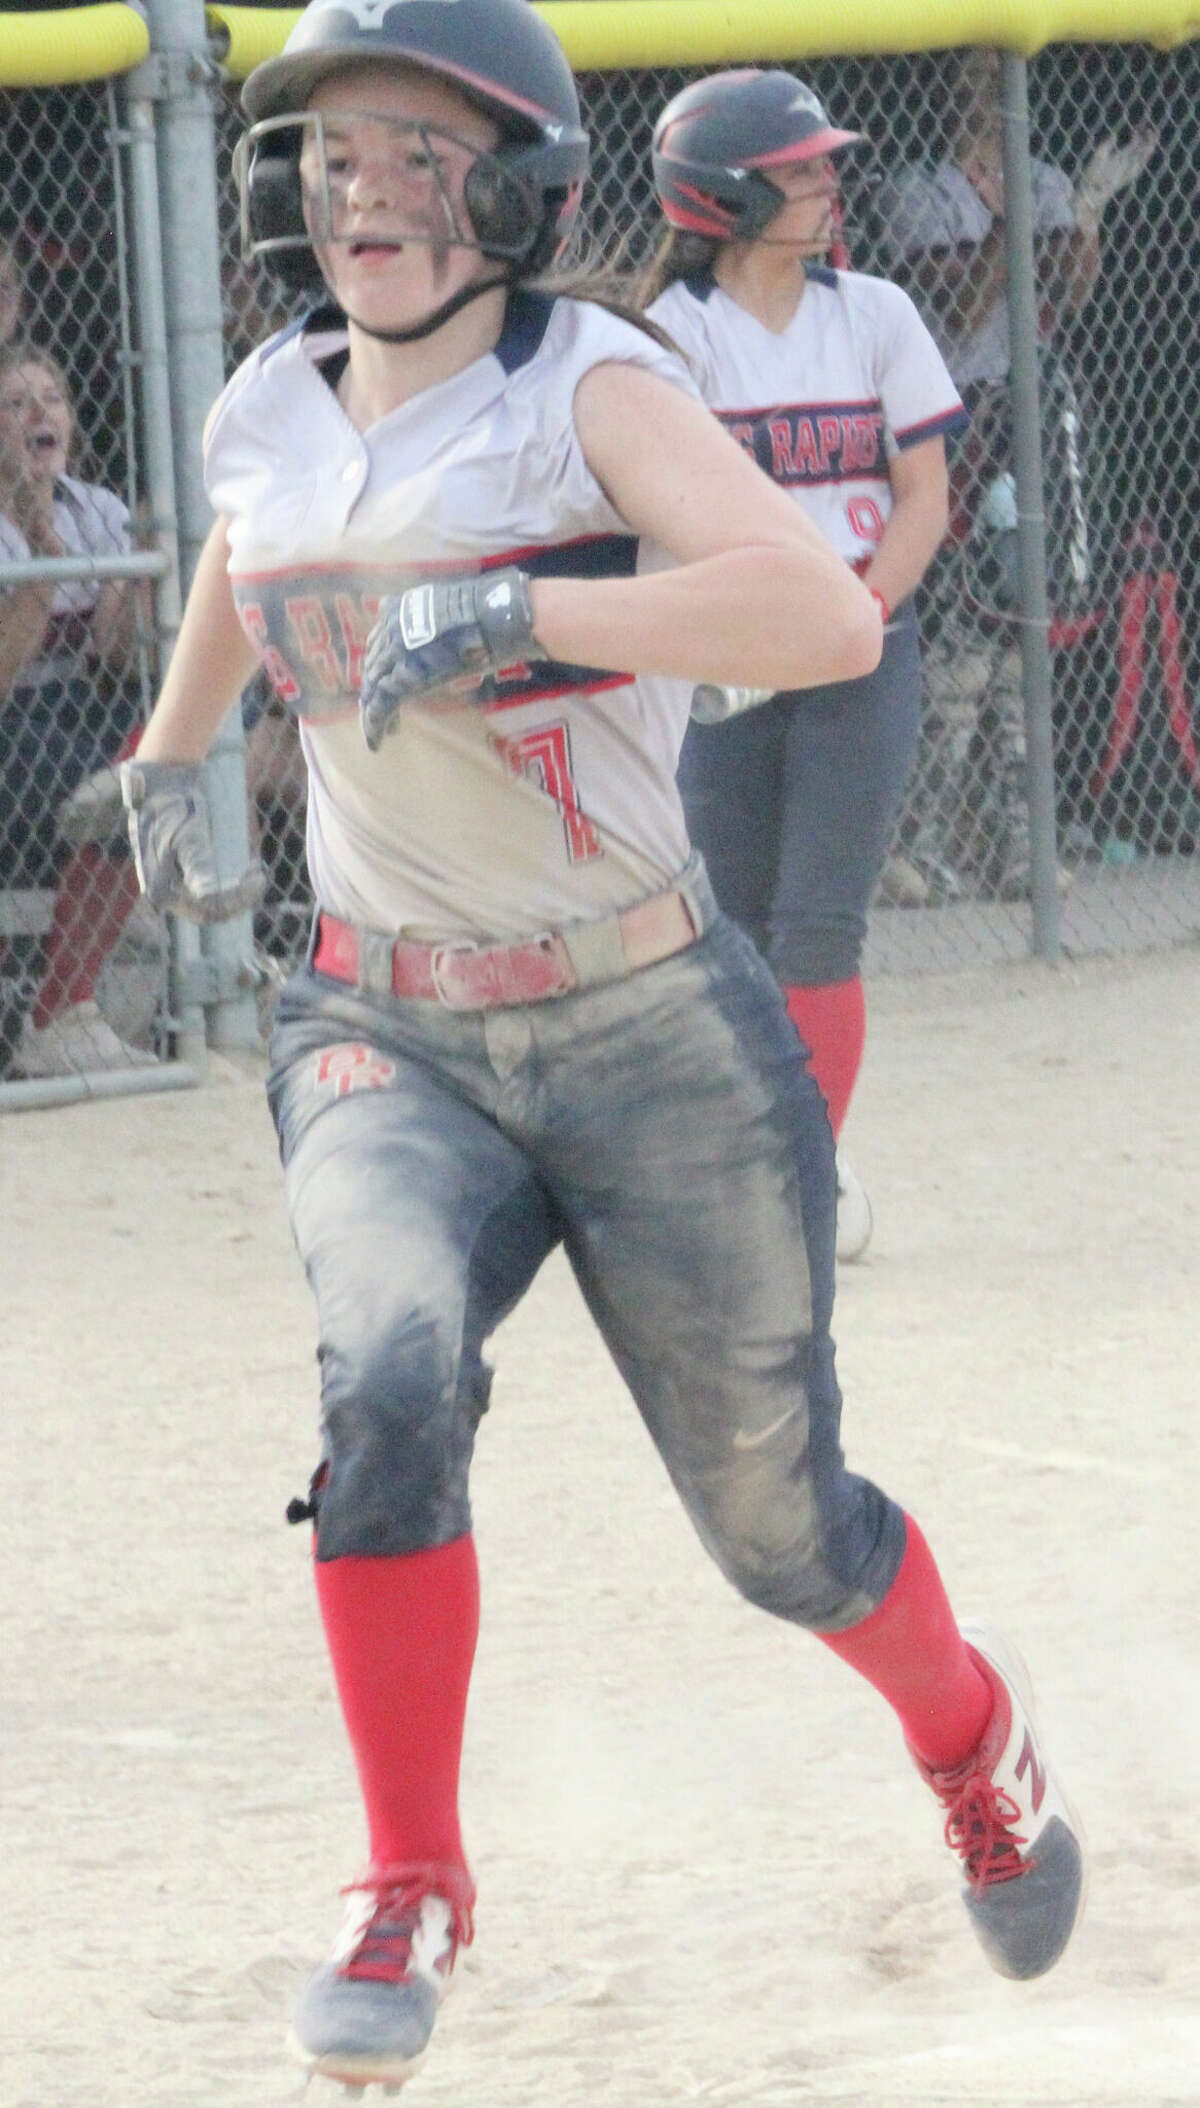 Pharis Carroll crosses the plate for Big Rapids during a game this past season.